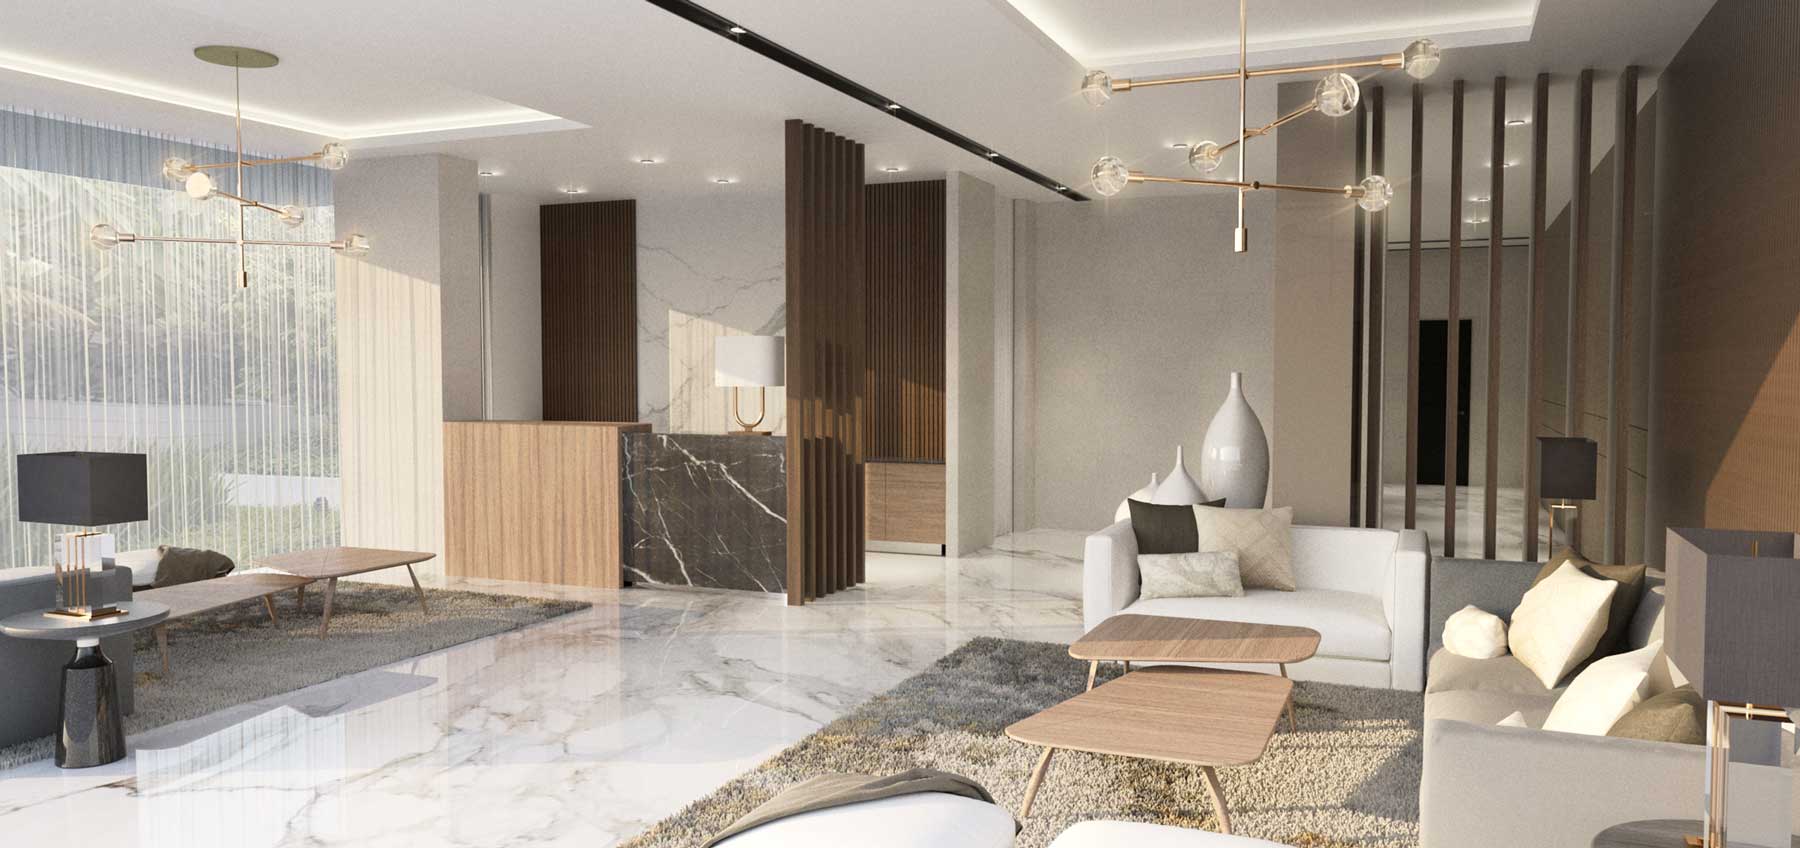 The Garden City lobby design, by WTA Architecture and Golden Bay Land Holdings, conceptualizes the interior design with luxury living in the urban city